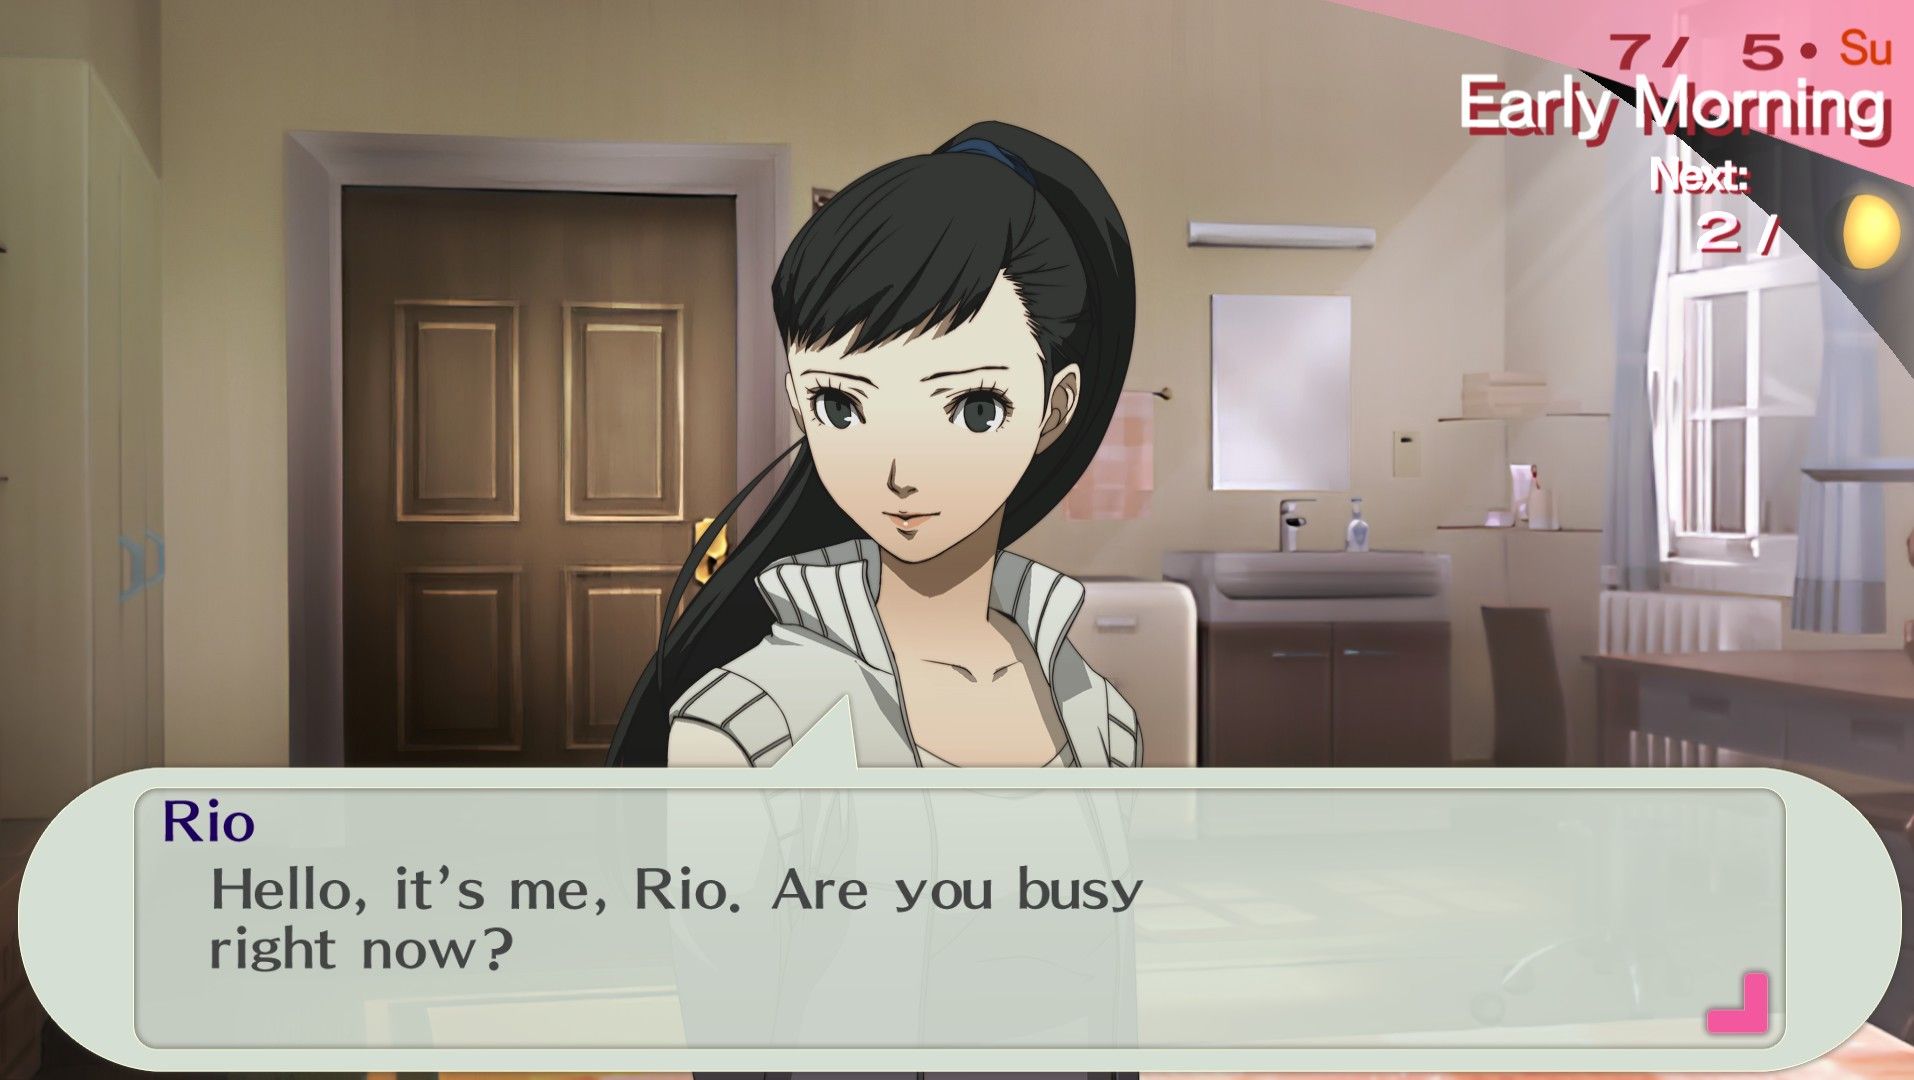 Rio calls the main character to ask if she wants to hang out in the portable version of persona 3